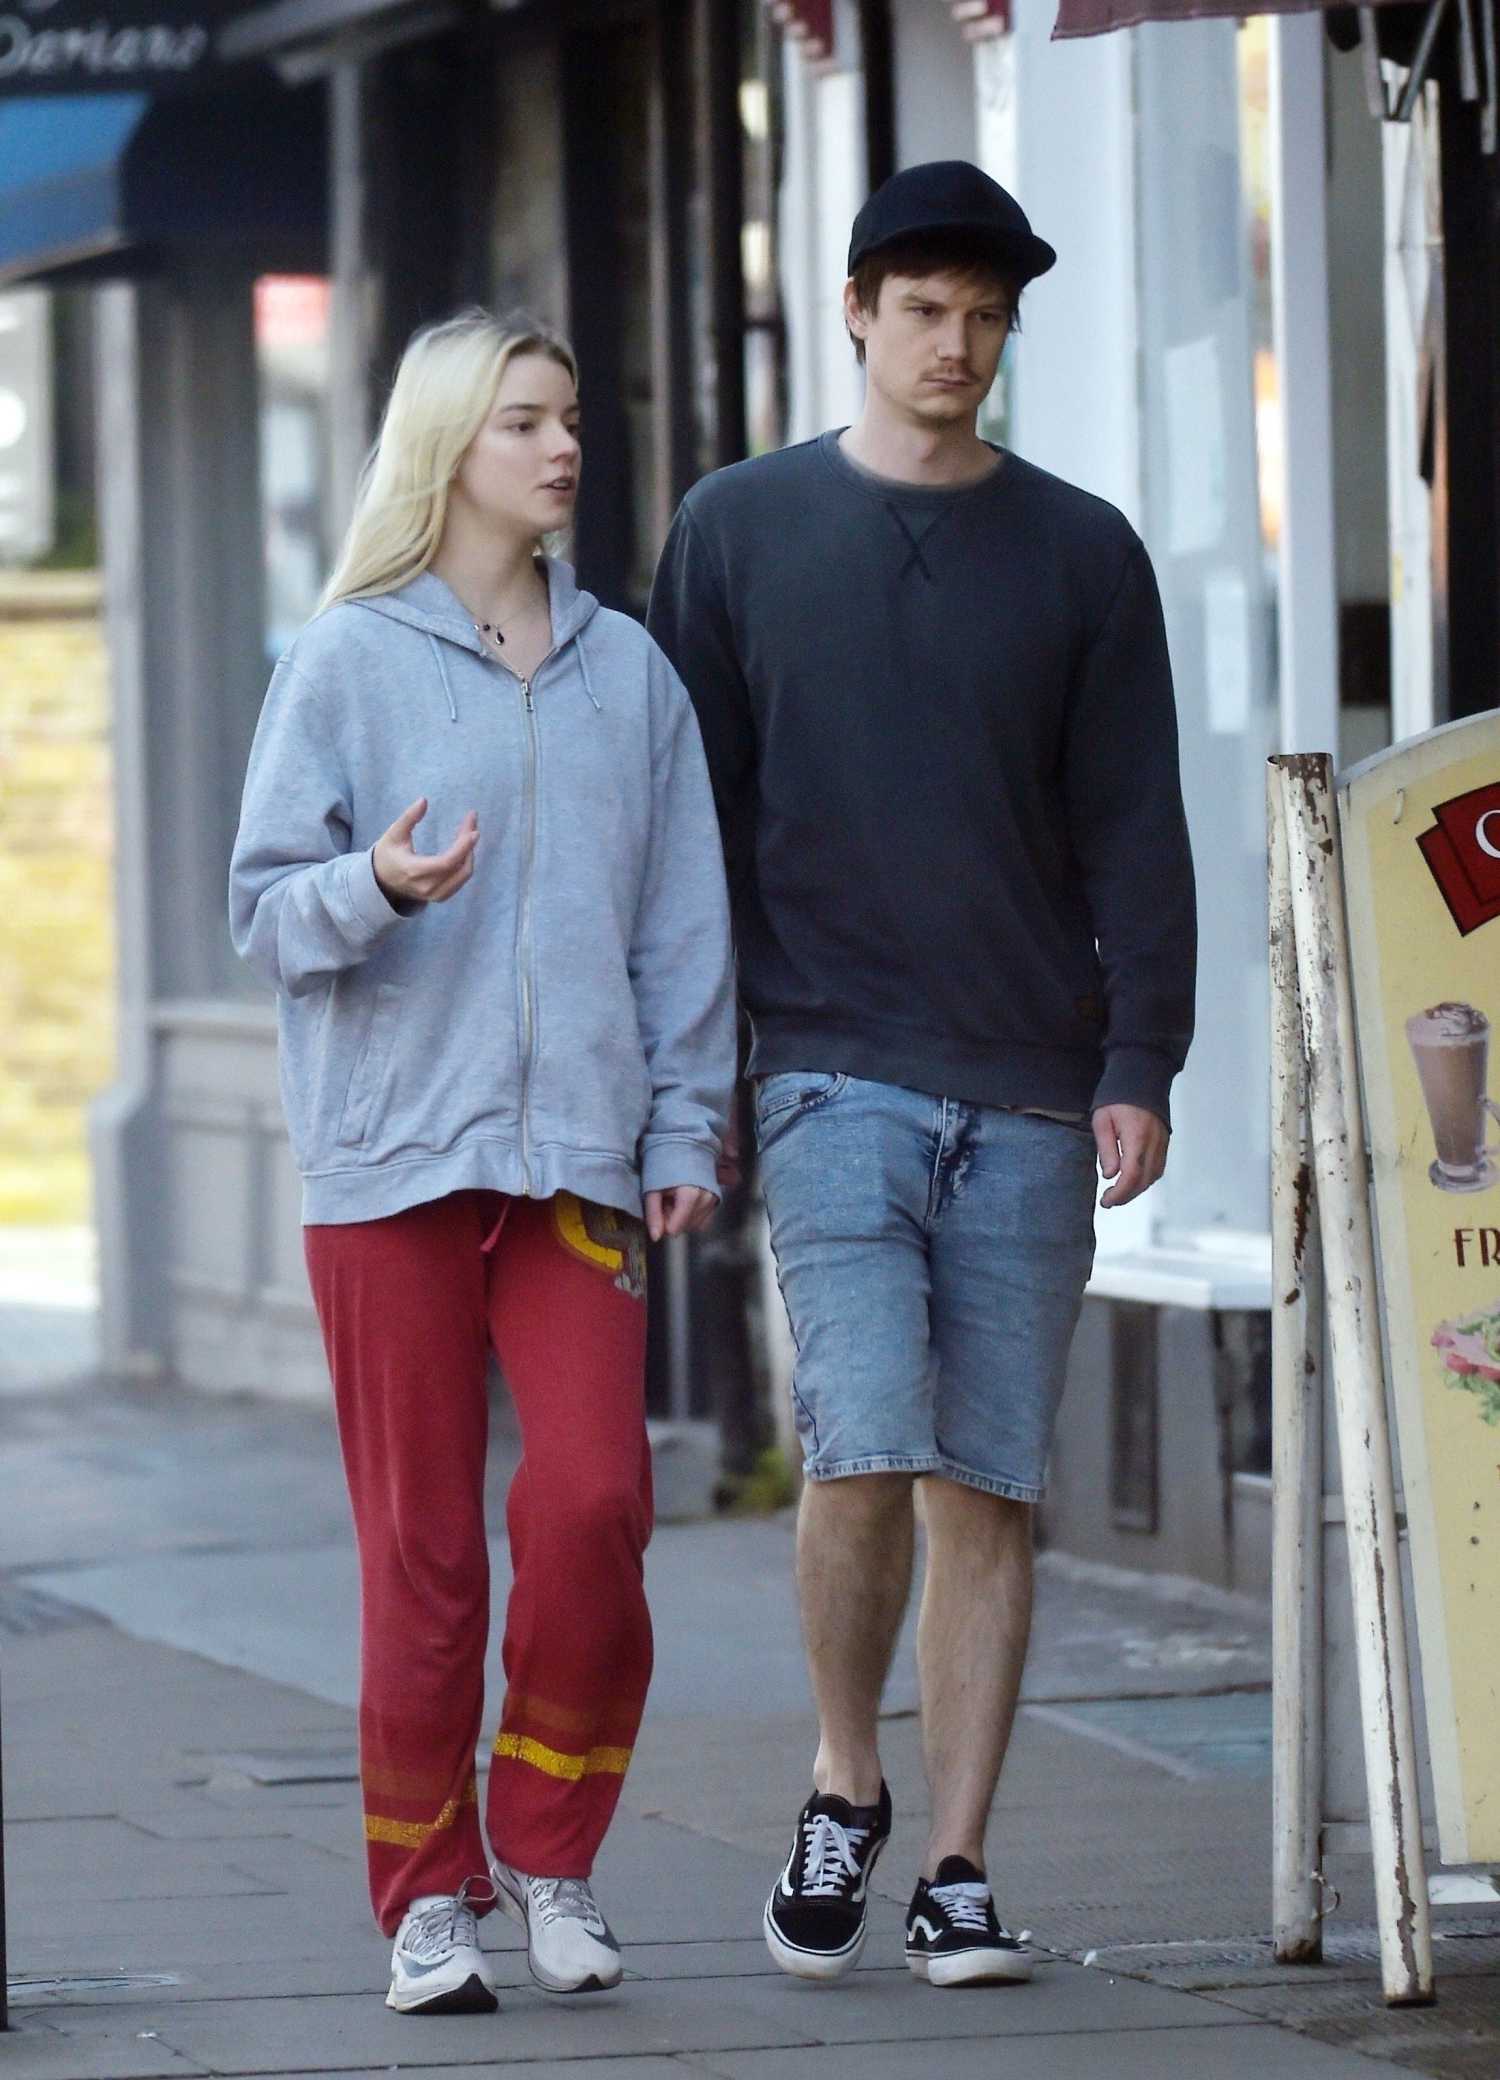 Anya TaylorJoy in a Gray Hoody Was Seen Out with Her